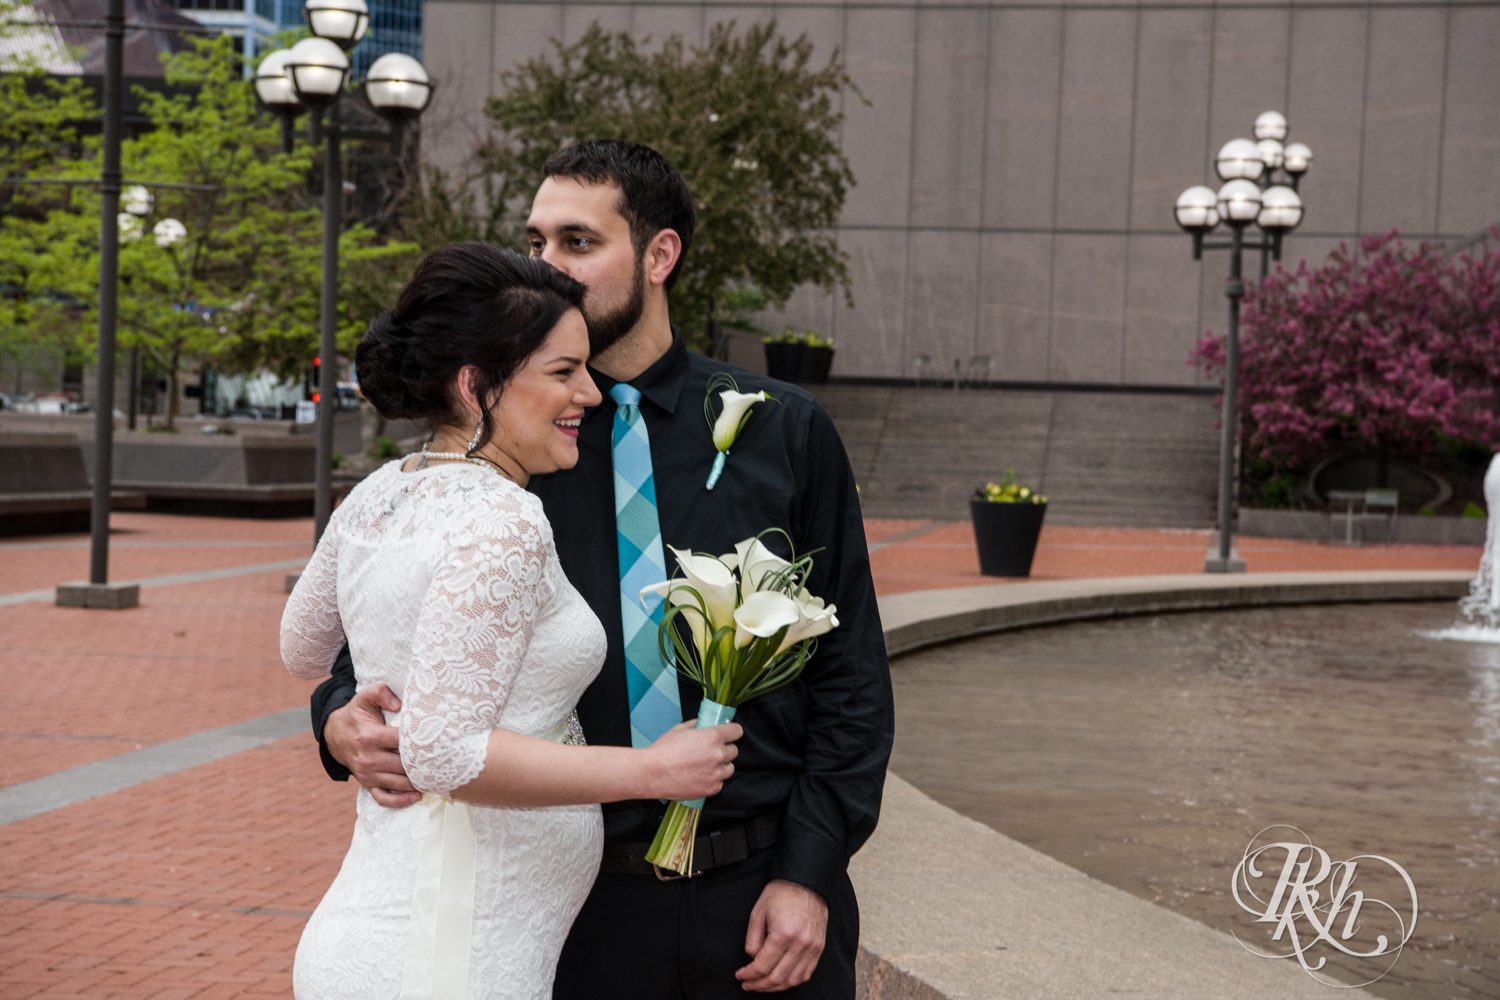 Bride and groom share first look in Minneapolis, Minnesota before their courthouse wedding.